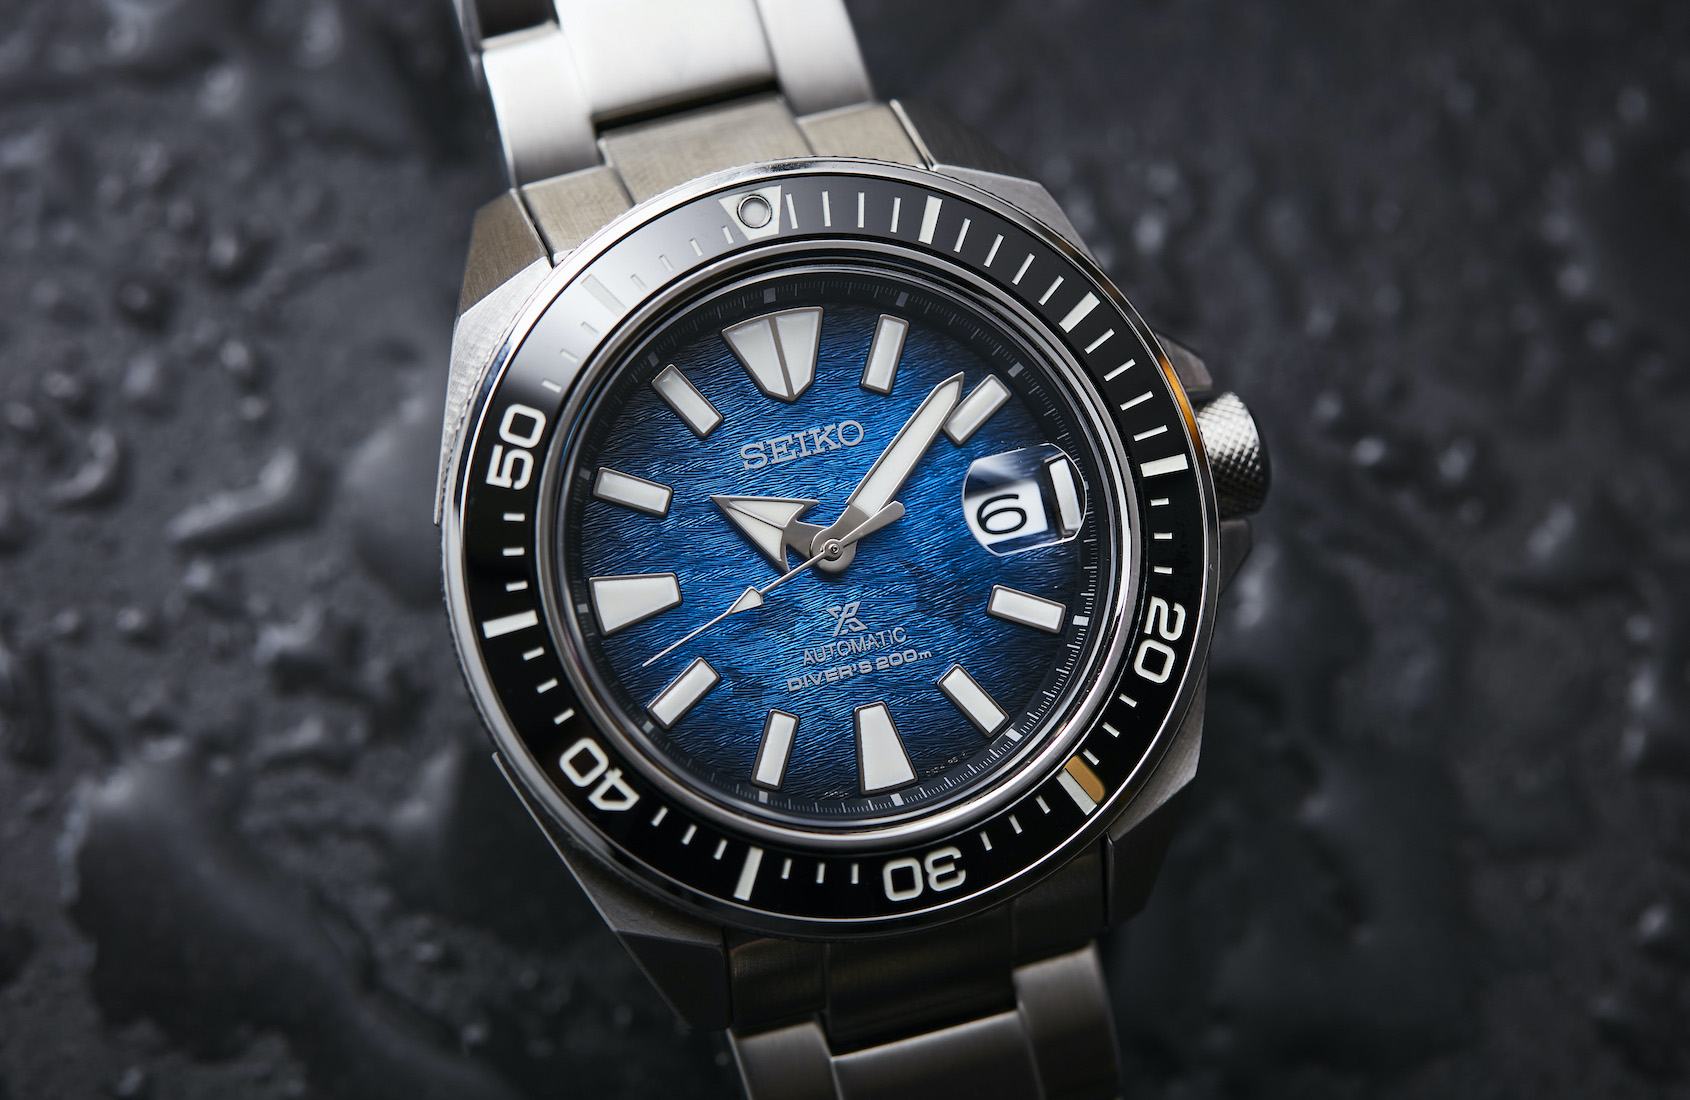 The new Seiko Prospex “Save the Ocean” SRPE33K has a scratched blue ocean dial you have to see to believe…